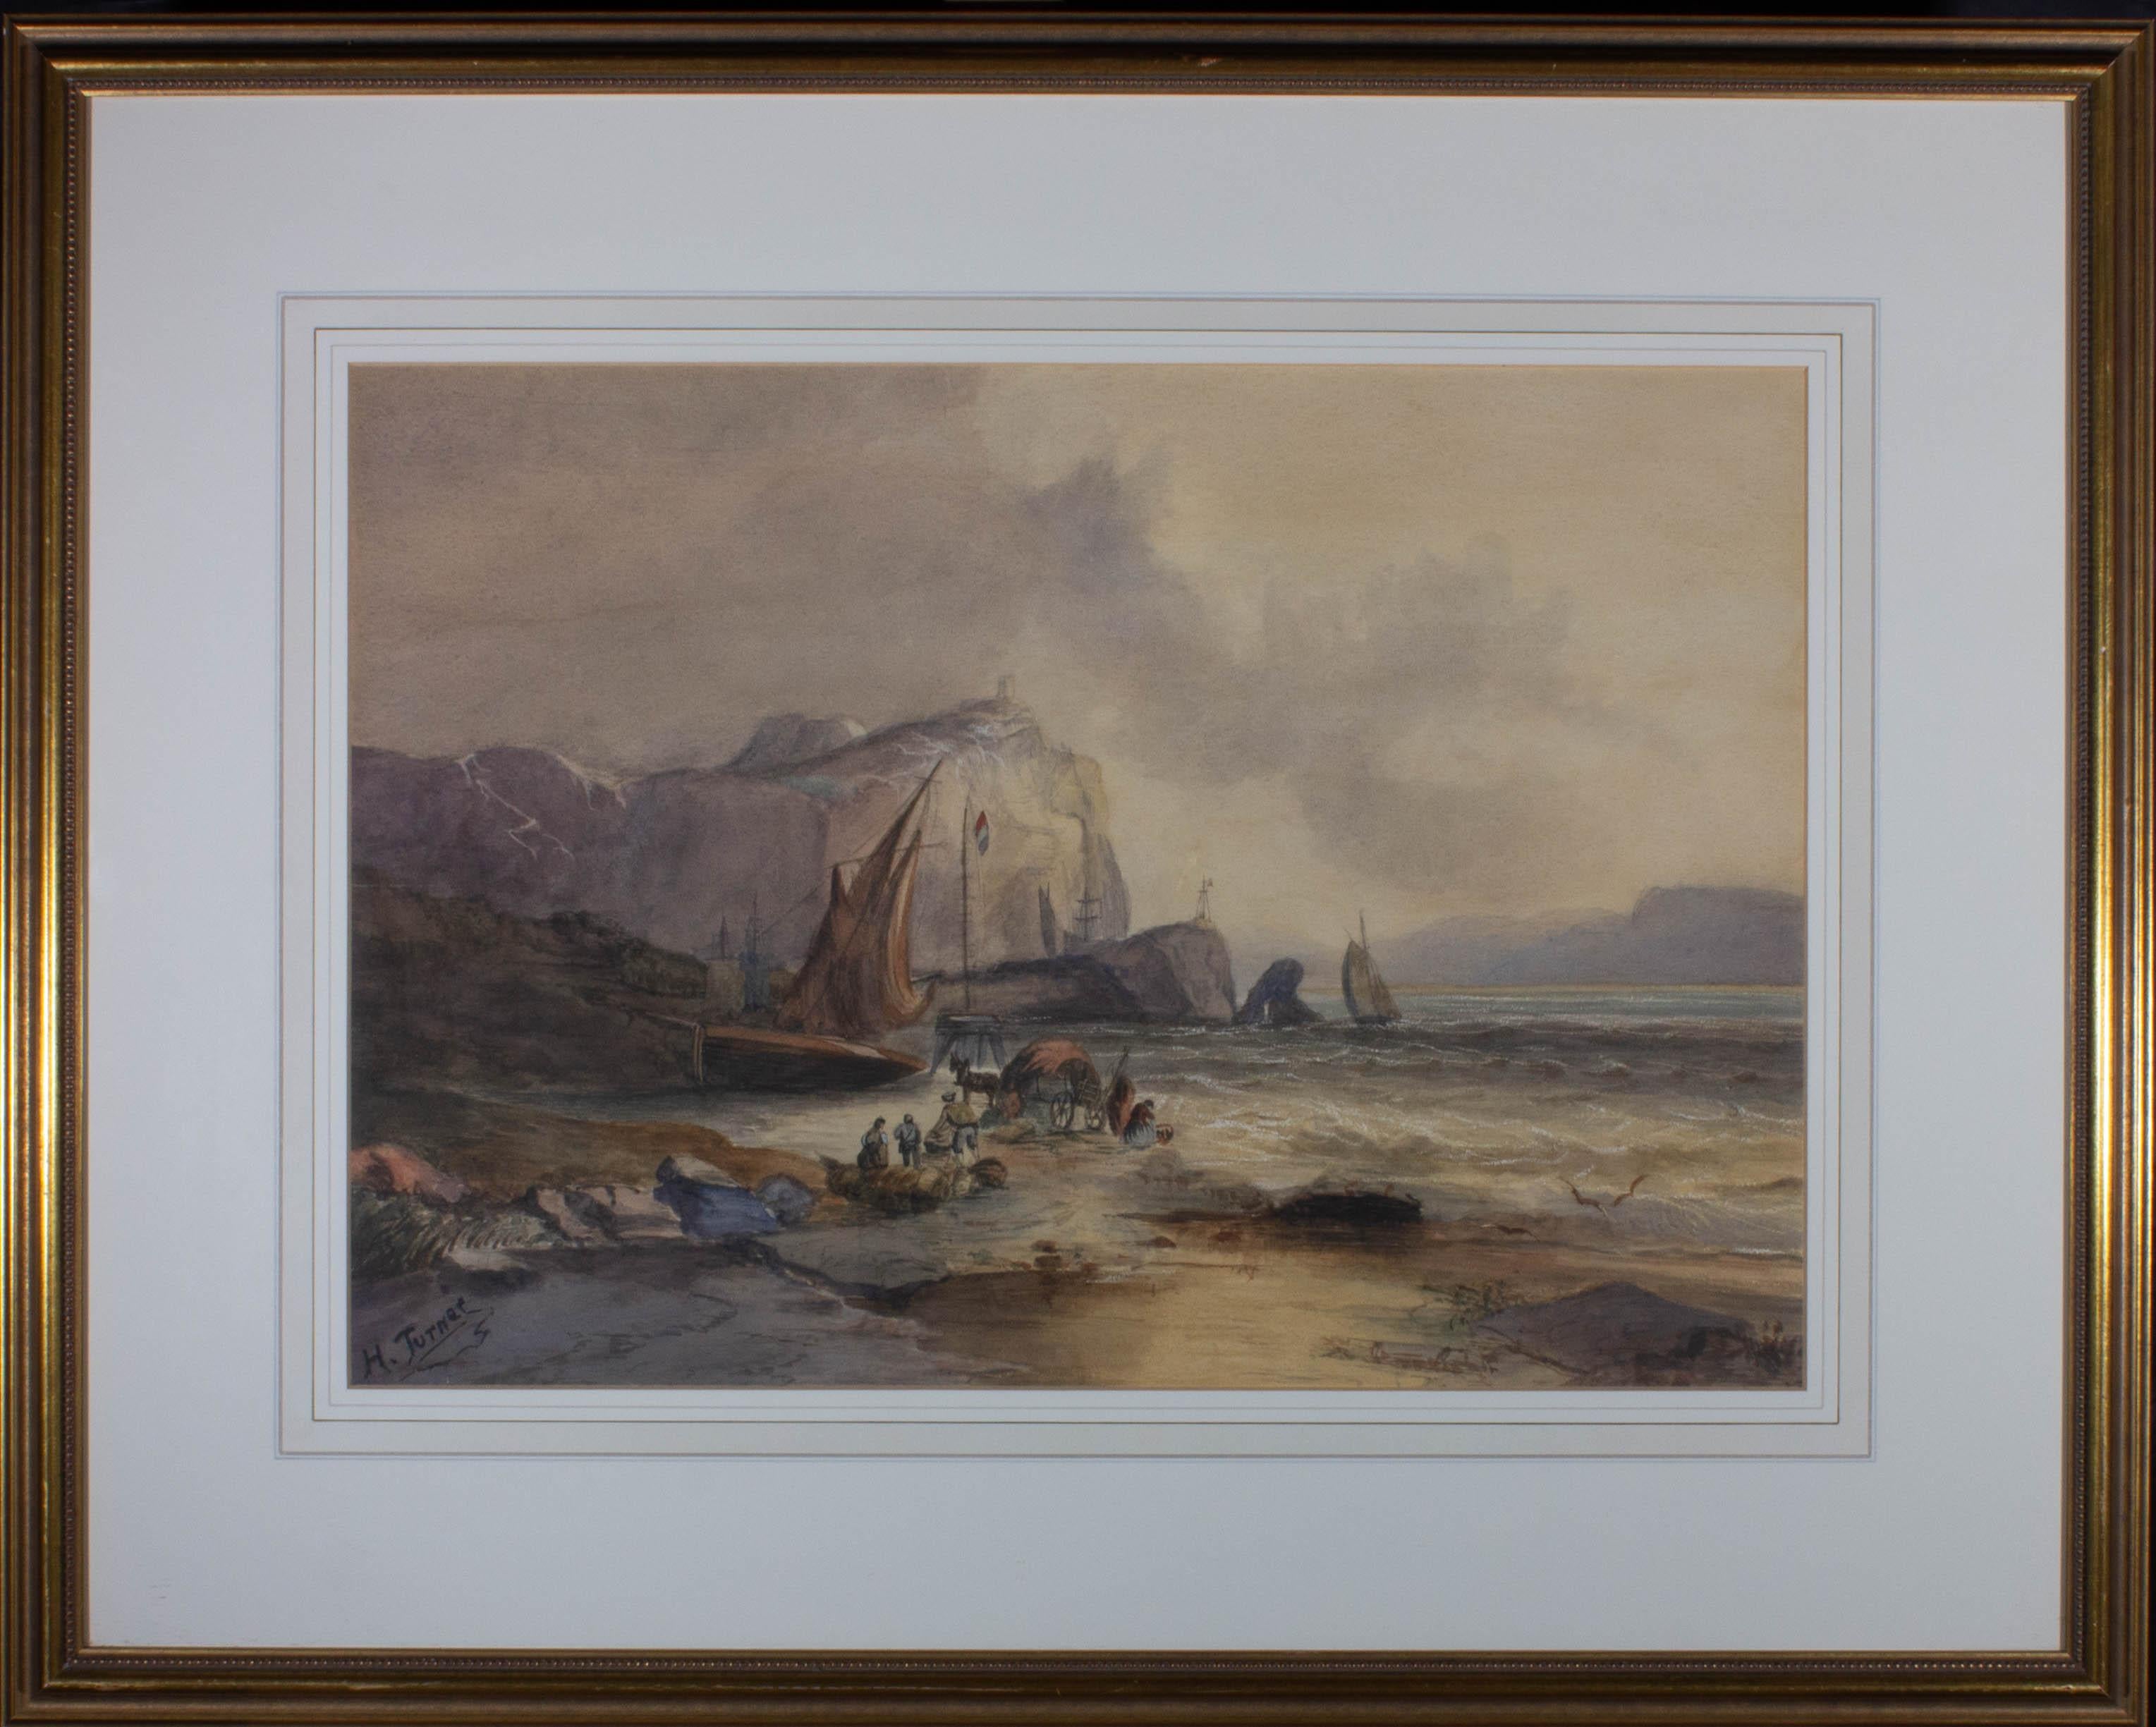 A fine coastal scene with sgraffito depicting fishermen working on a rocky coastline. The tricolore flies on a mast at the centre of the composition. Presented glazed in a white wash line mount and a distressed gilt-effect wooden frame. Signed to